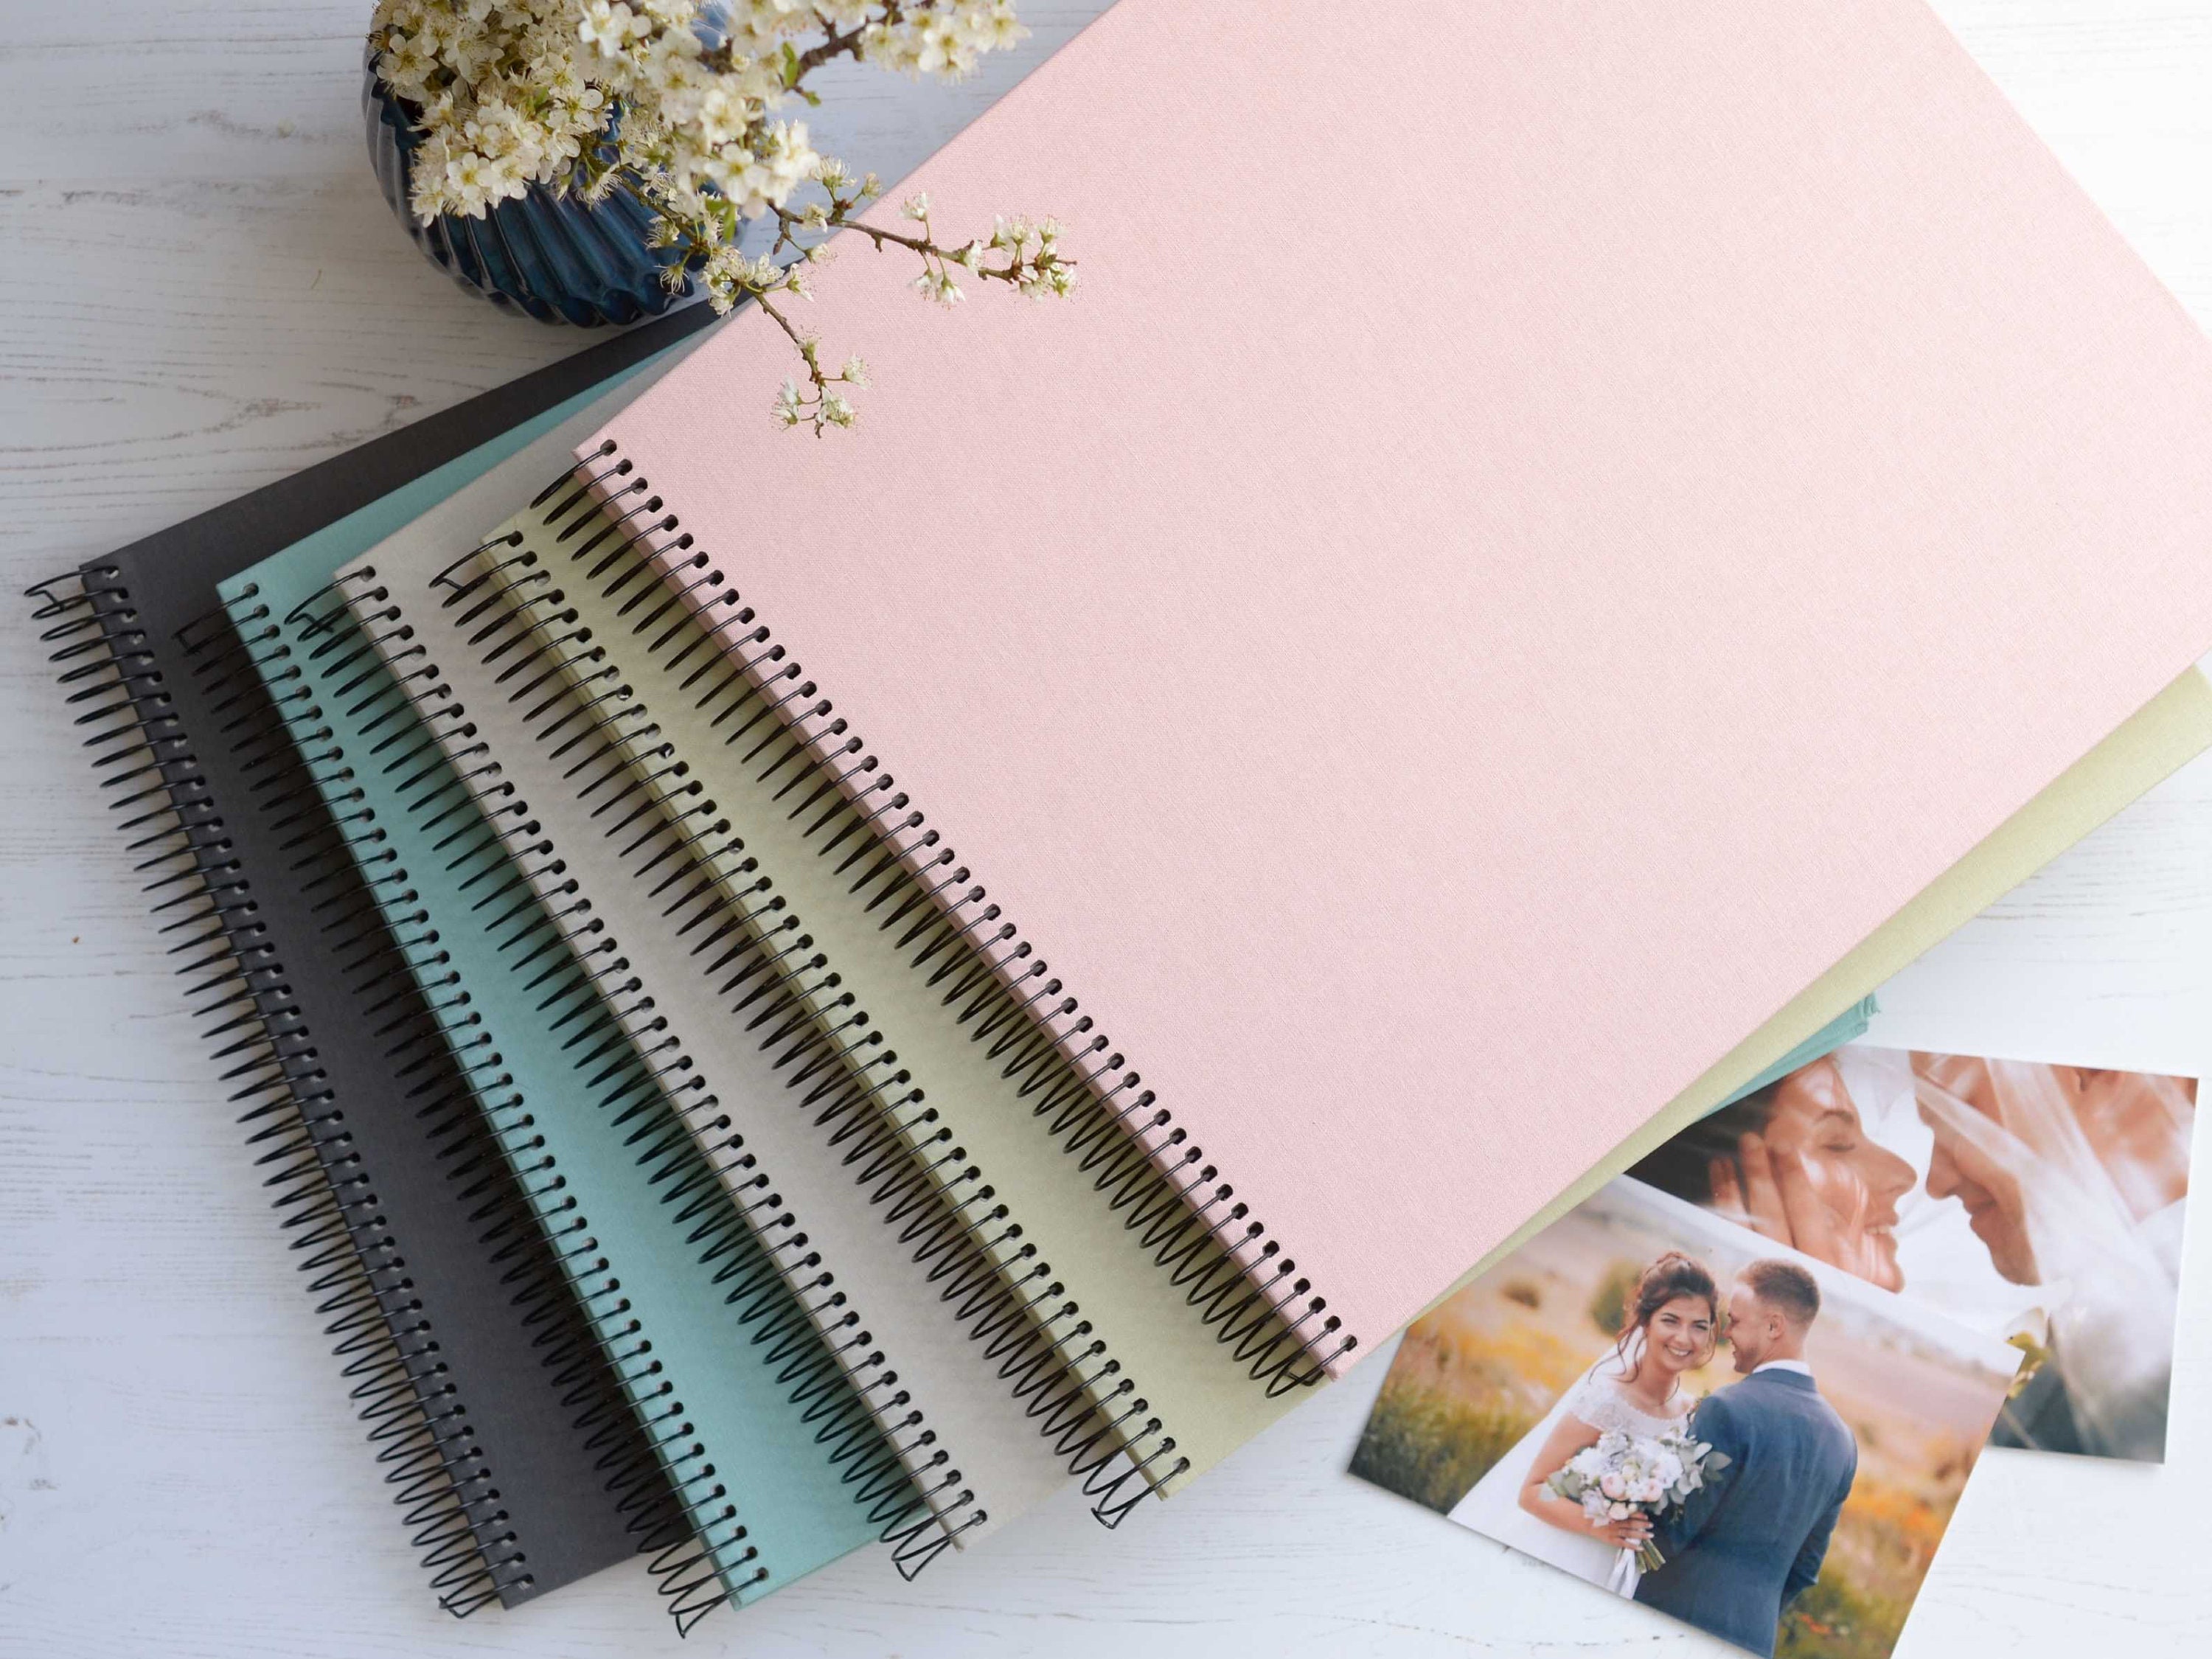 Personalised Modern Scrapbook Photo Album With Self-adhesive Pages